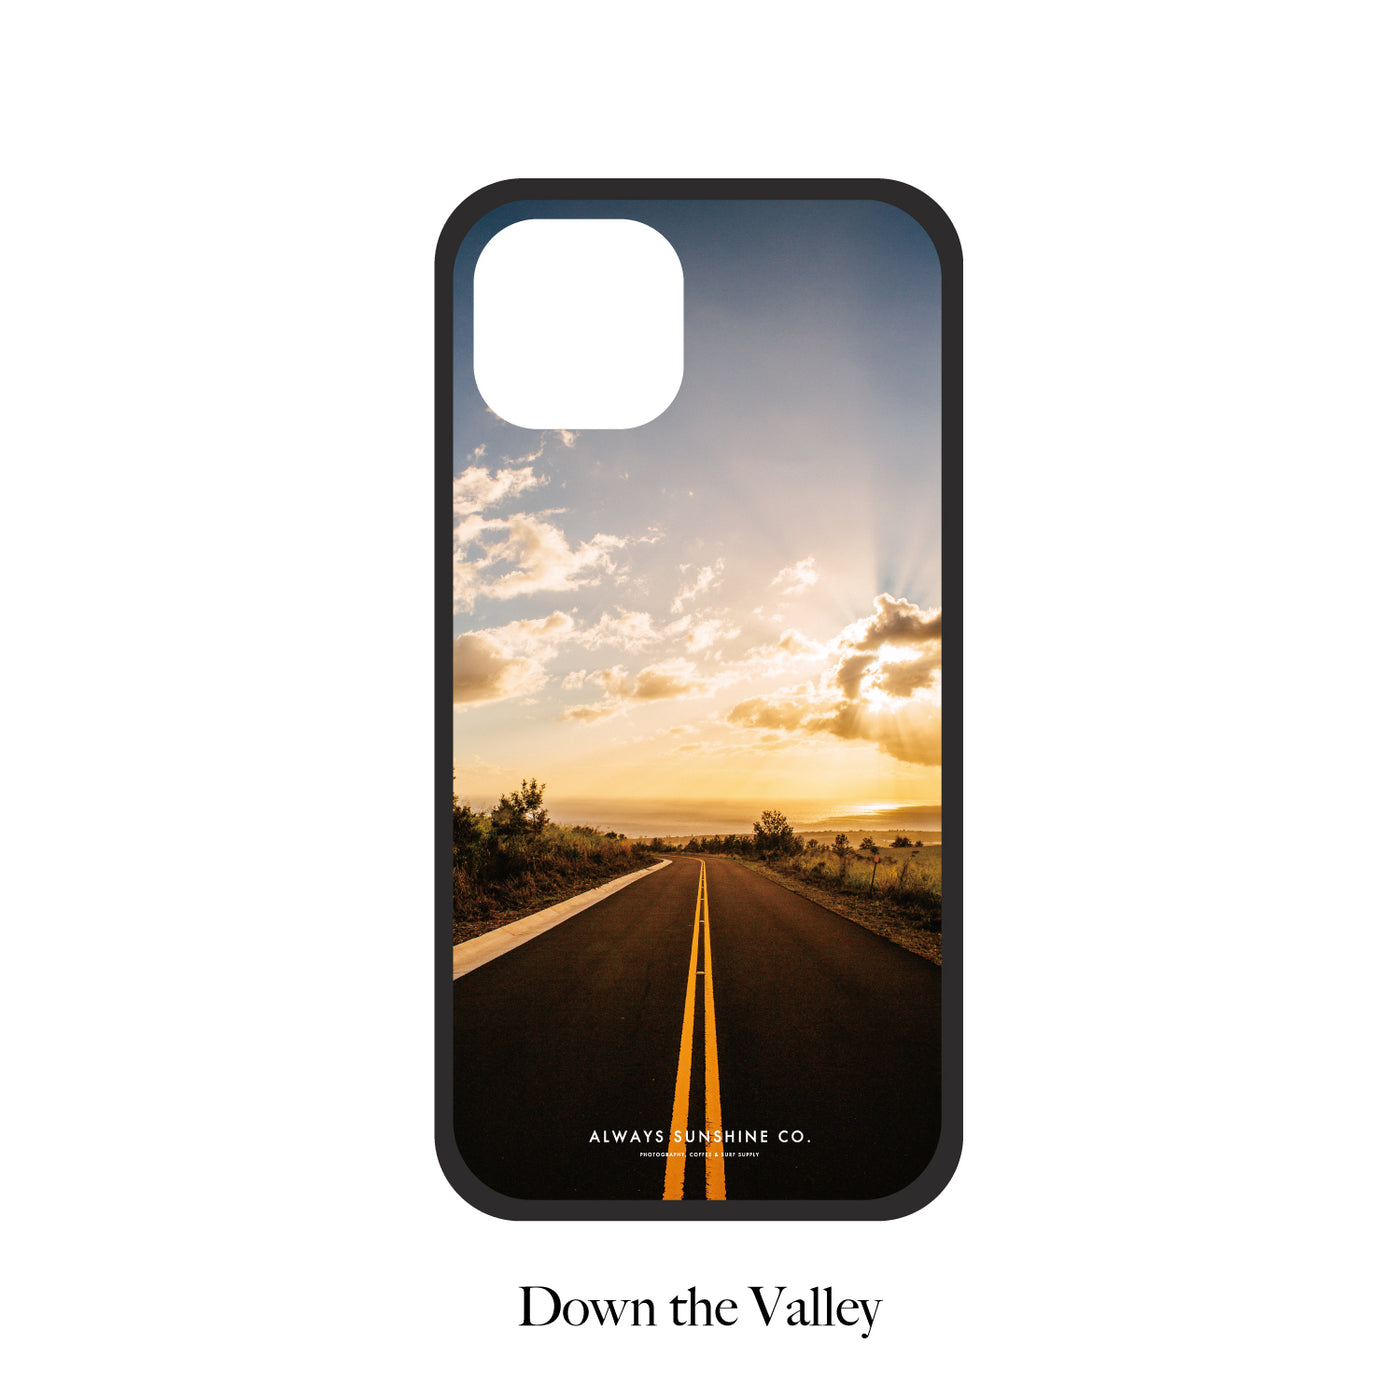 【PAGE 5】完全受注オーダー Glass Photo iPhone Cover -HAWAII-48種類